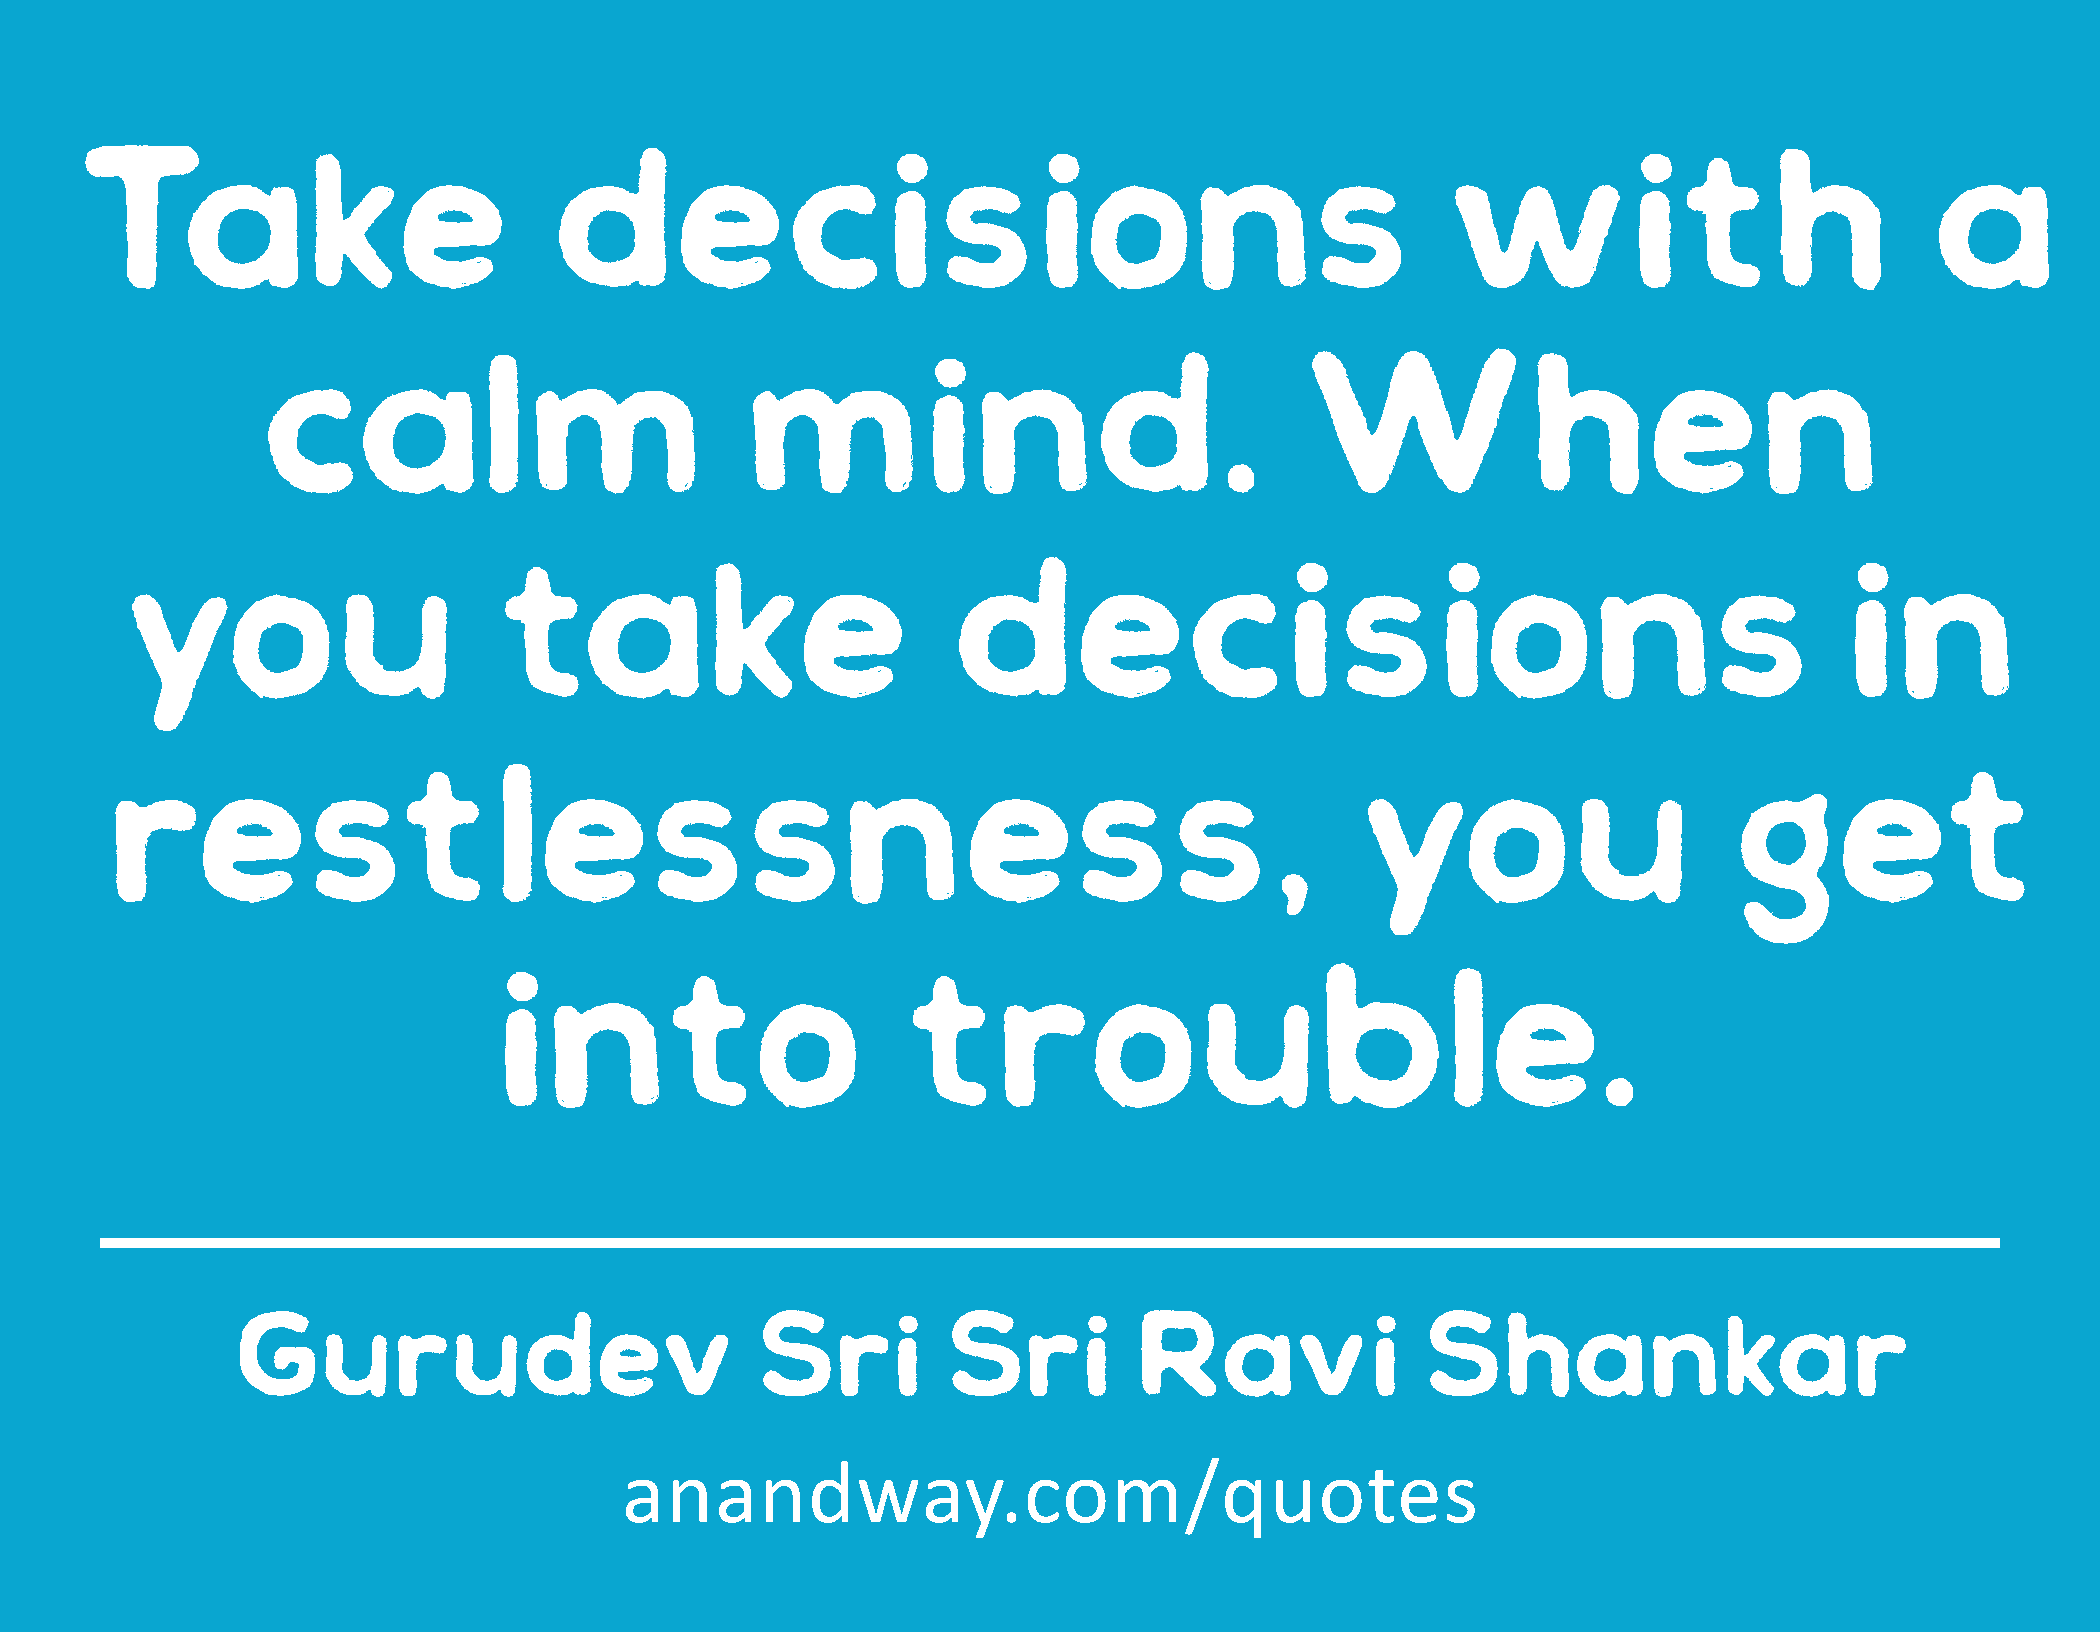 Take decisions with a calm mind. When you take decisions in restlessness, you get into trouble. 
 -Gurudev Sri Sri Ravi Shankar